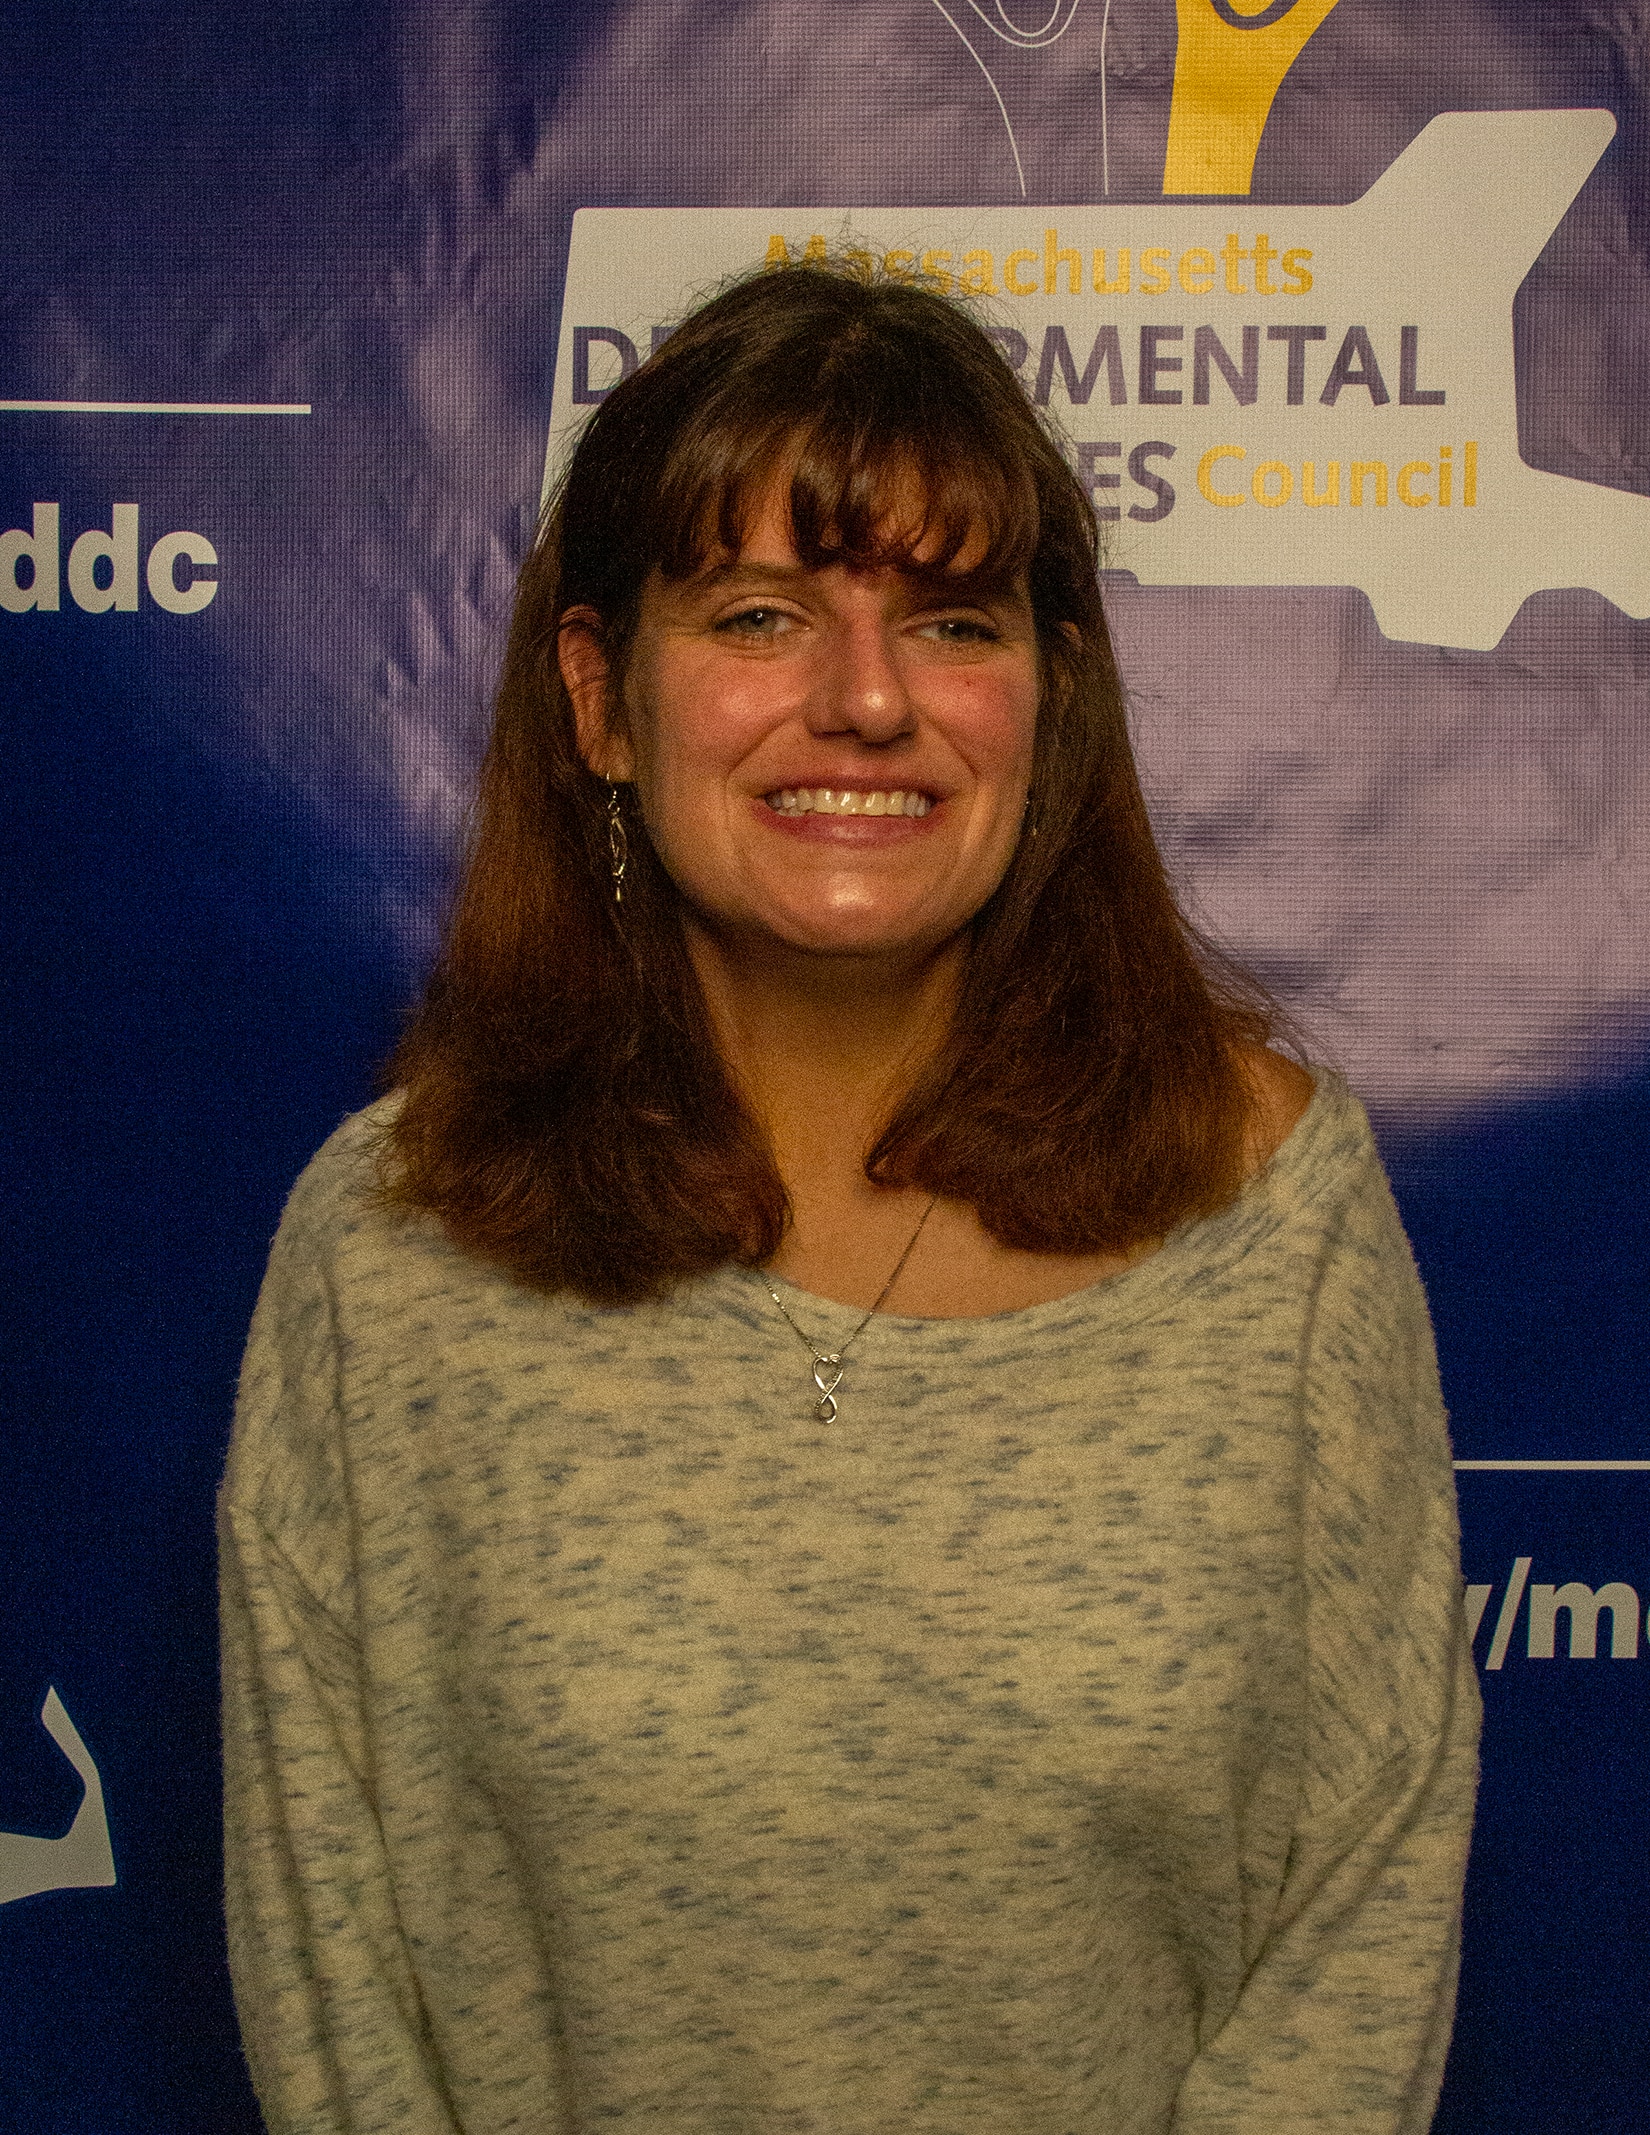 A white woman with medium length brown hair and bangs wearing a cream colored sweater stands in front of a blue banner with the MDDC logo on it.